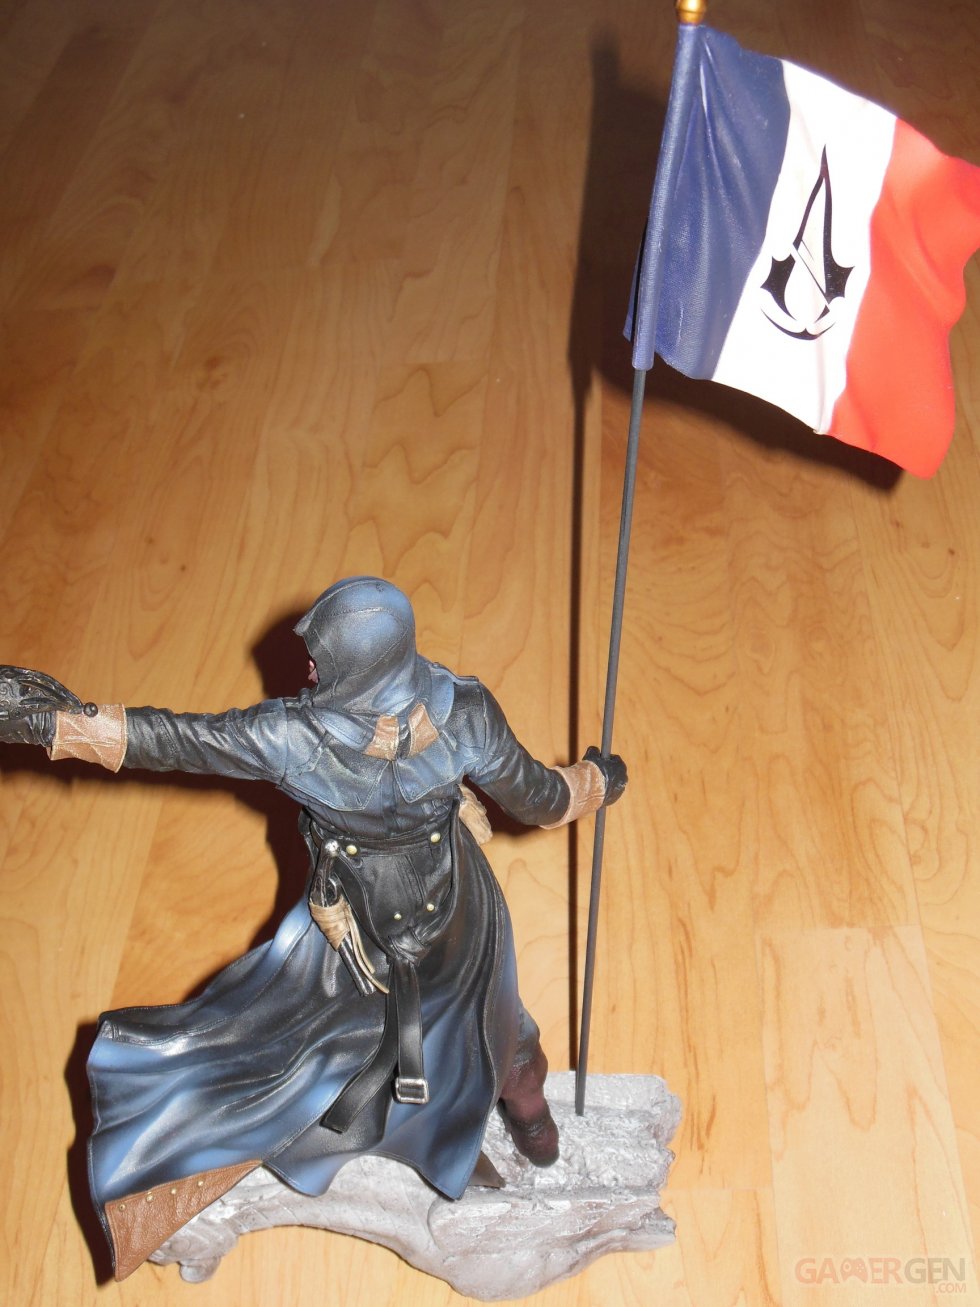 assassin-creed-unity-unboxing-deballage-photo-gamer-gen-collector-us-canada-americain-15